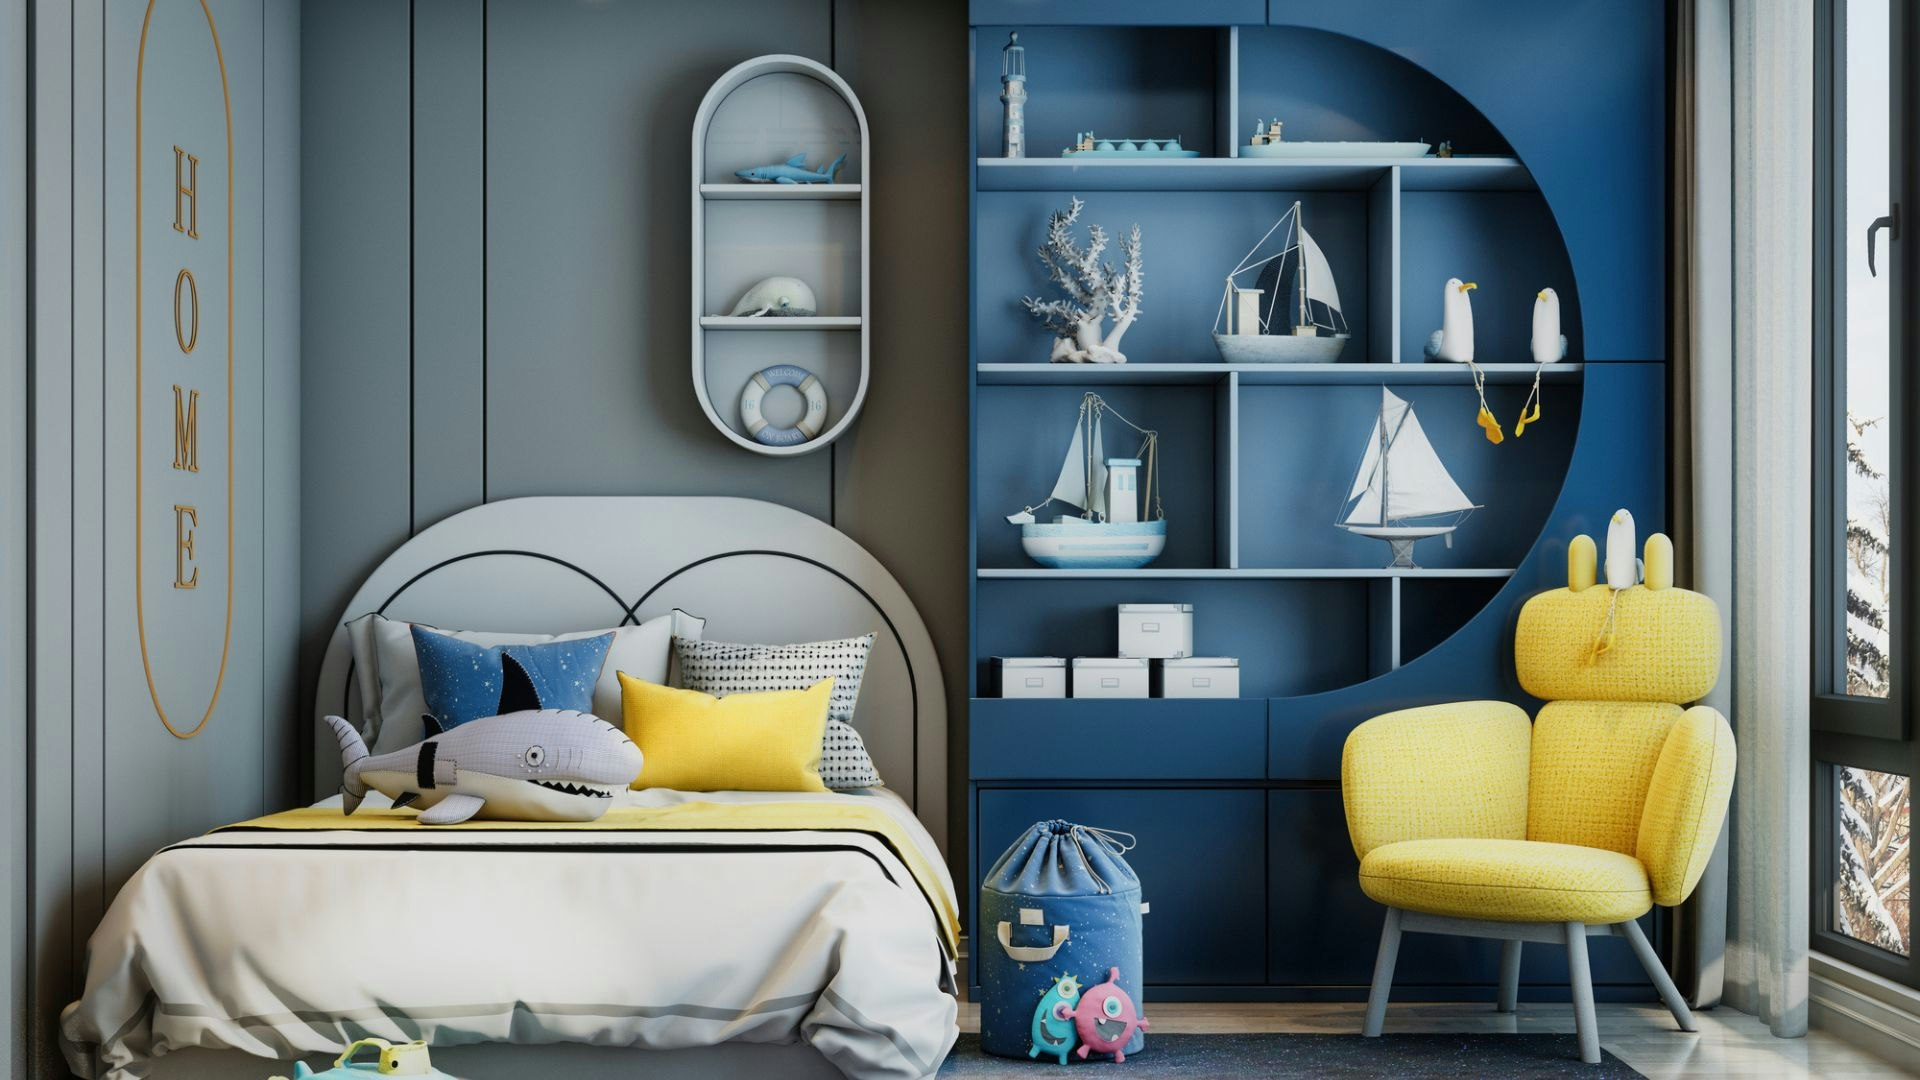 Navy bedroom ideas: A bedroom with an arch in